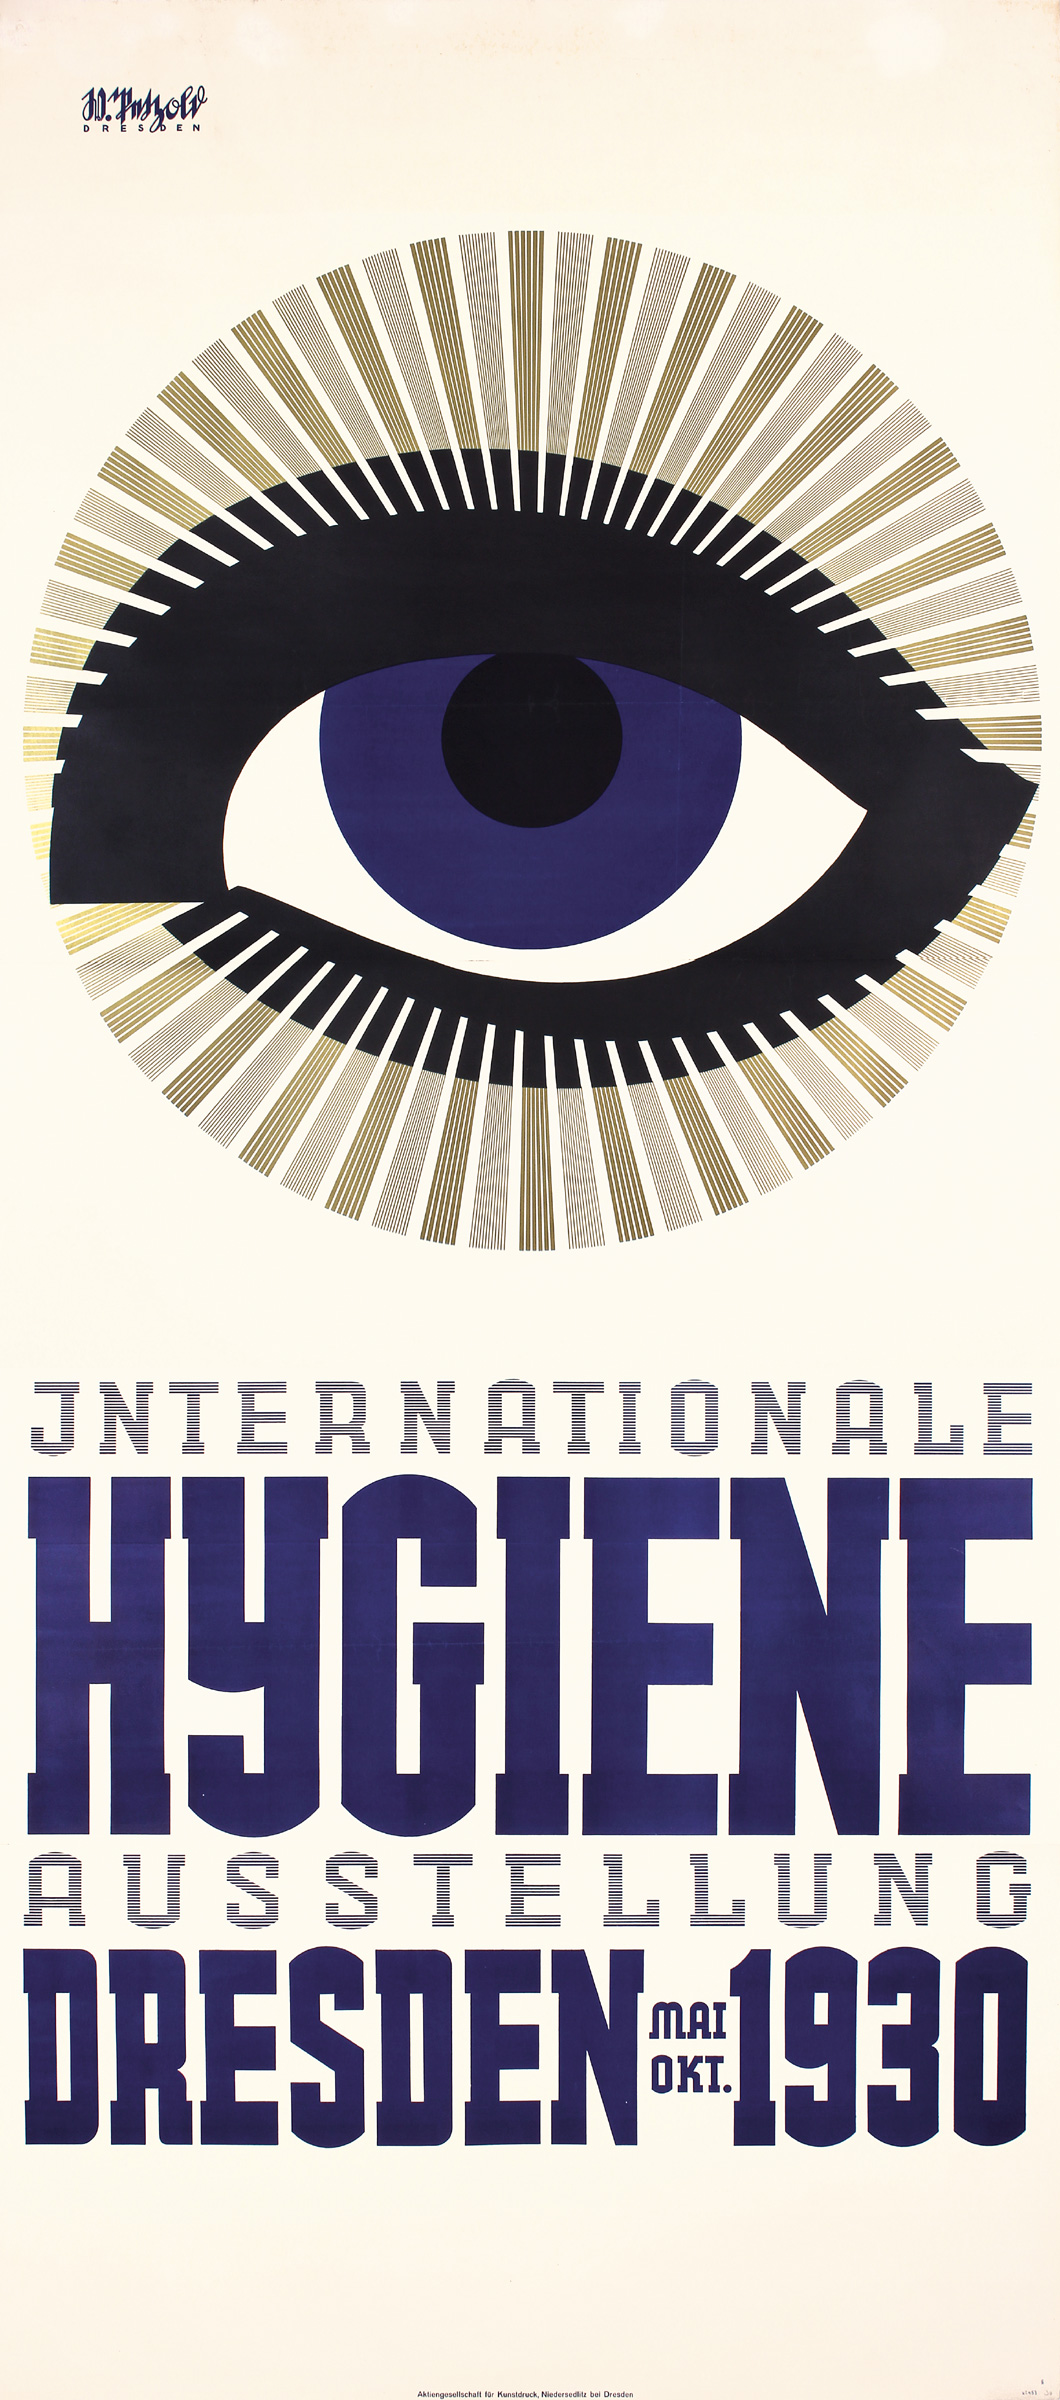 Rare 3-Sheet for the Hygiene Exhibition, 1930